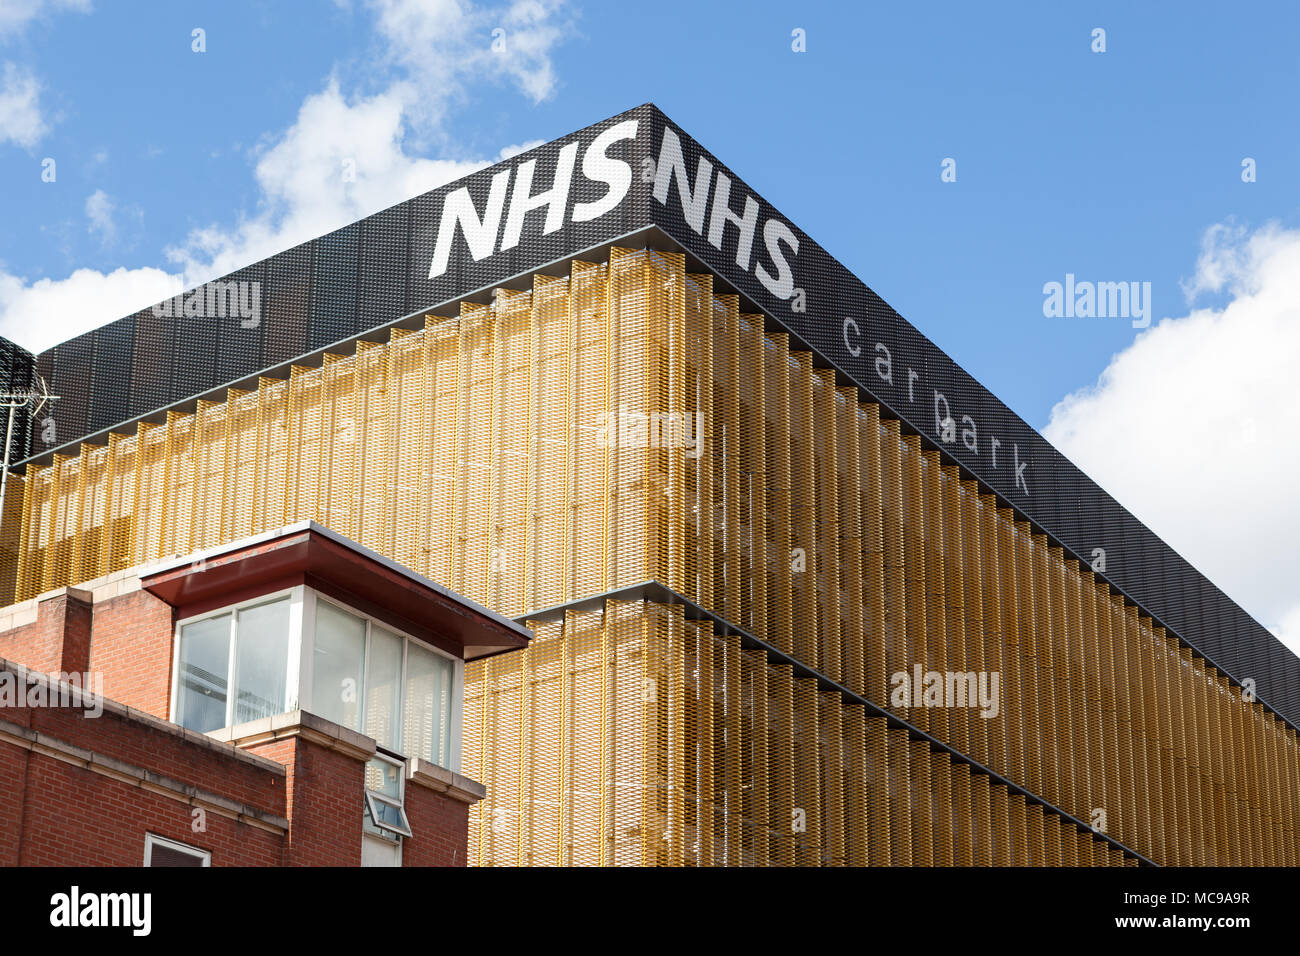 An NHS (National Health Service) car park located near to the Manchester Royal Infirmary hospital off Oxford Road in Manchester Stock Photo